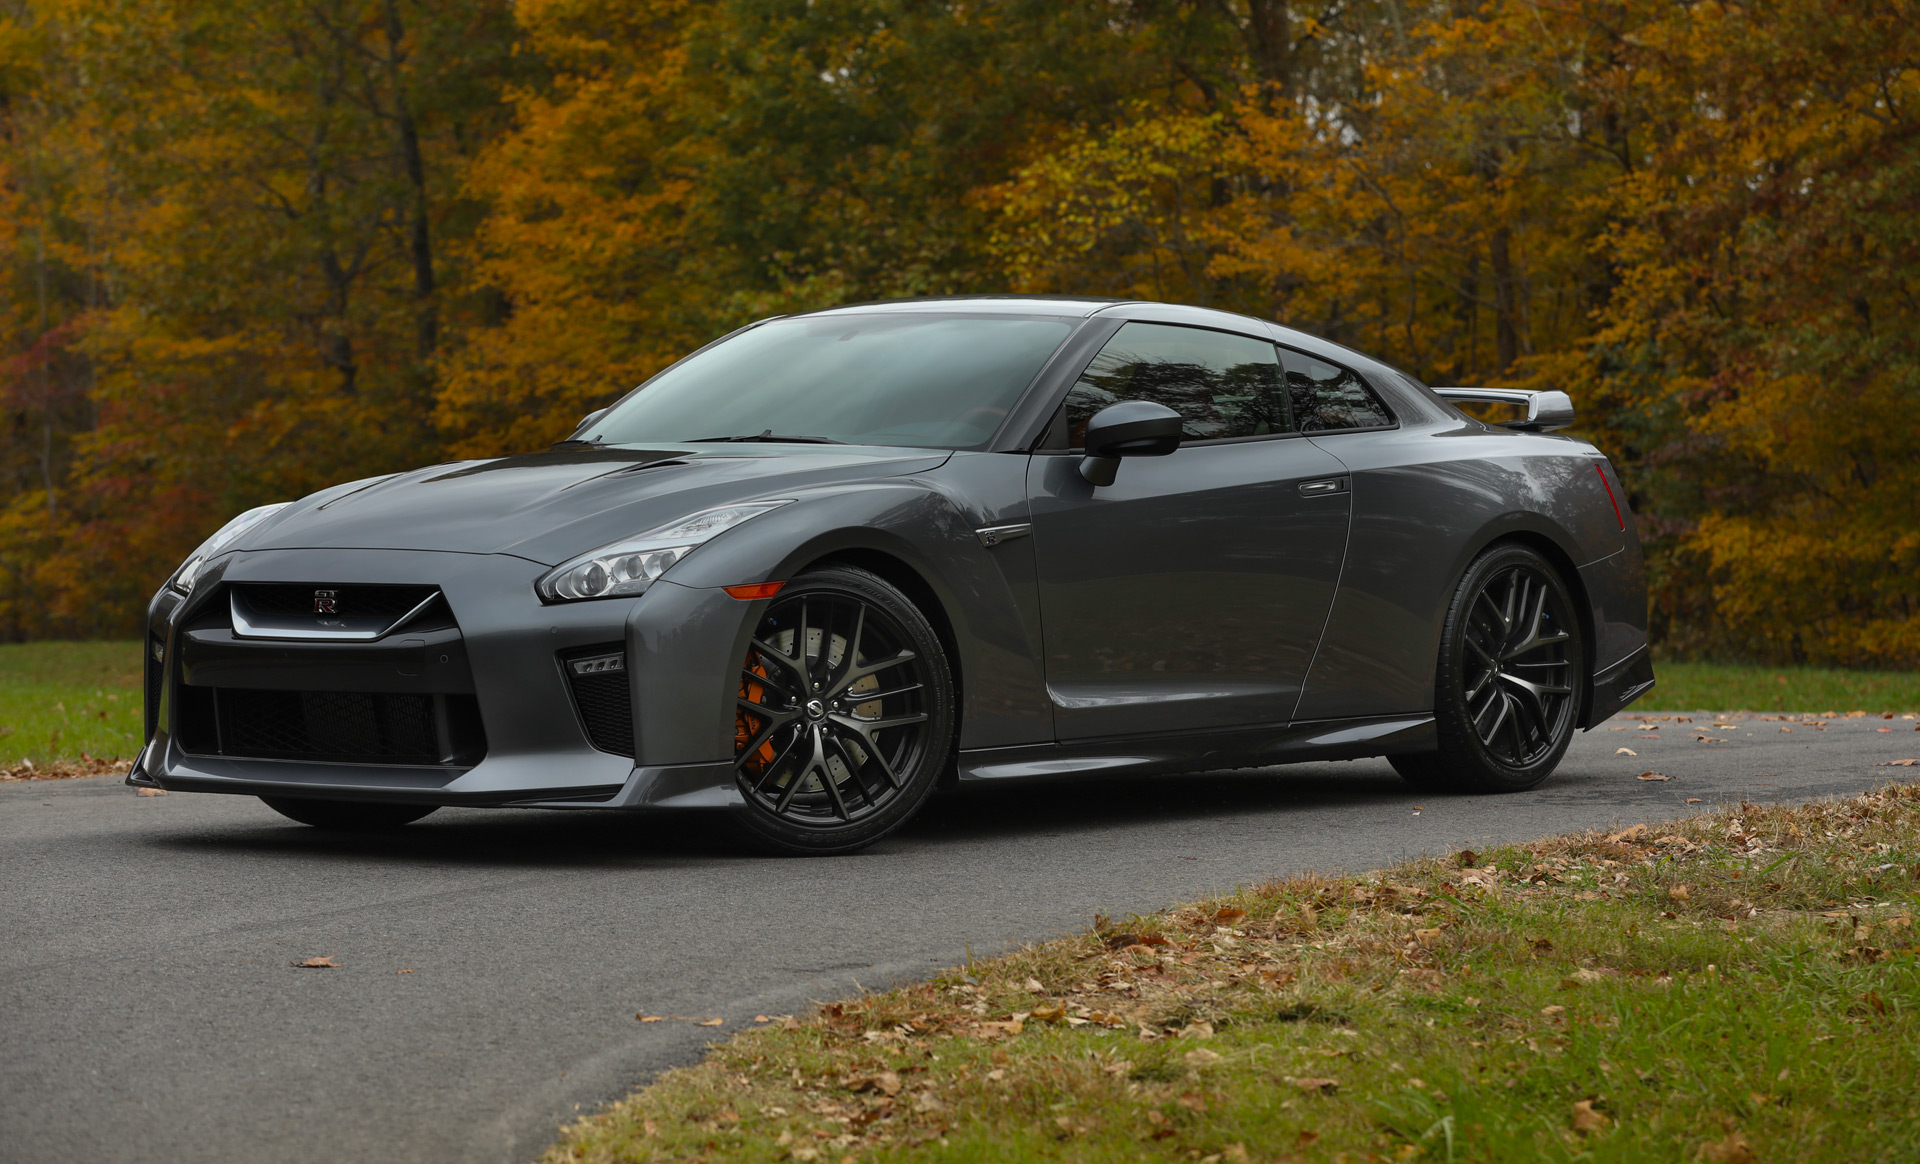 18 Nissan Gt R Review Ratings Specs Prices And Photos The Car Connection